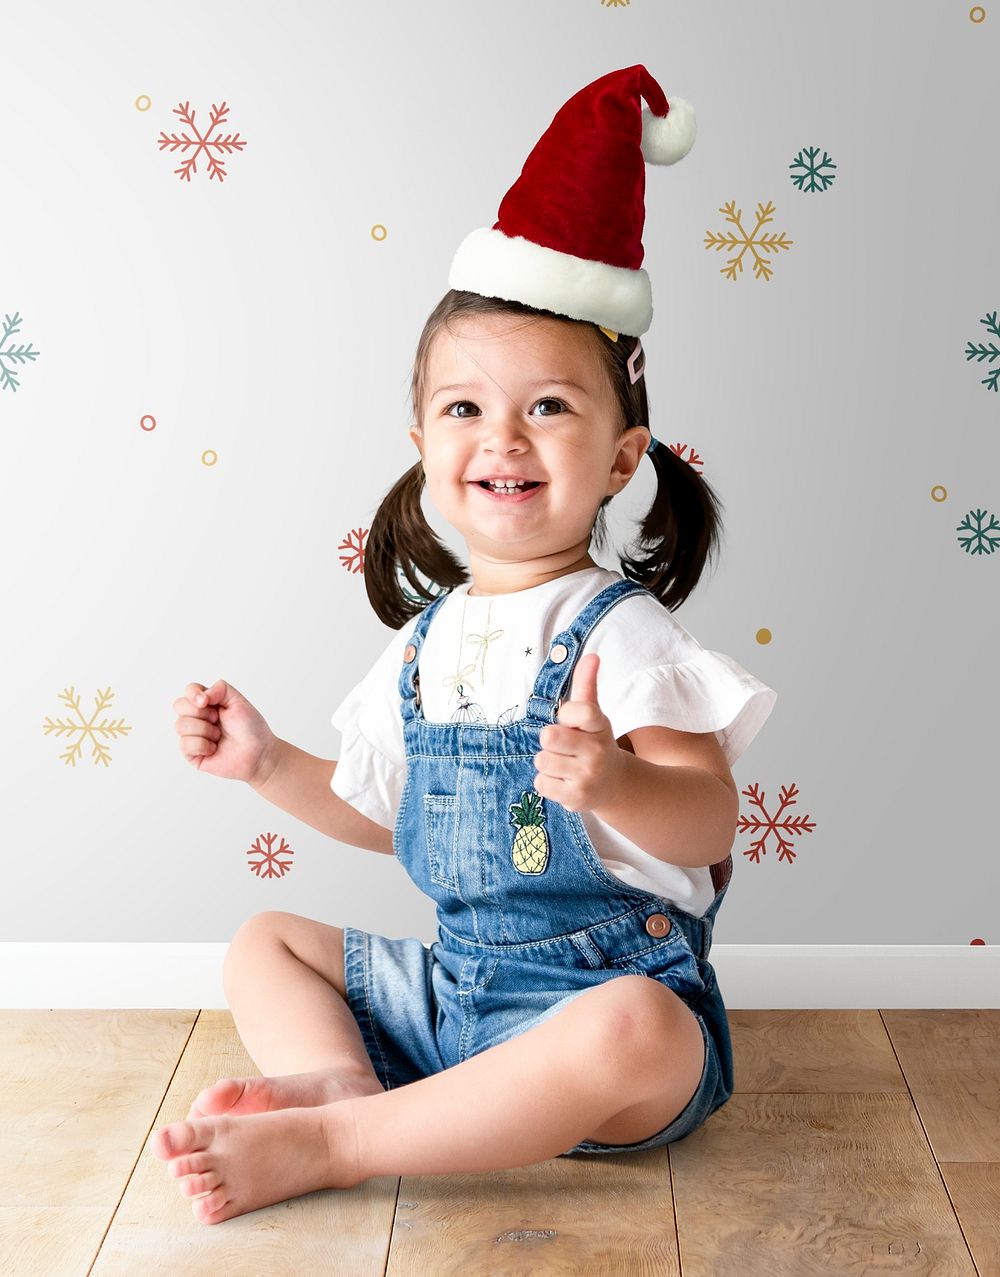 Cheerful little girl wearing a Christmas hat